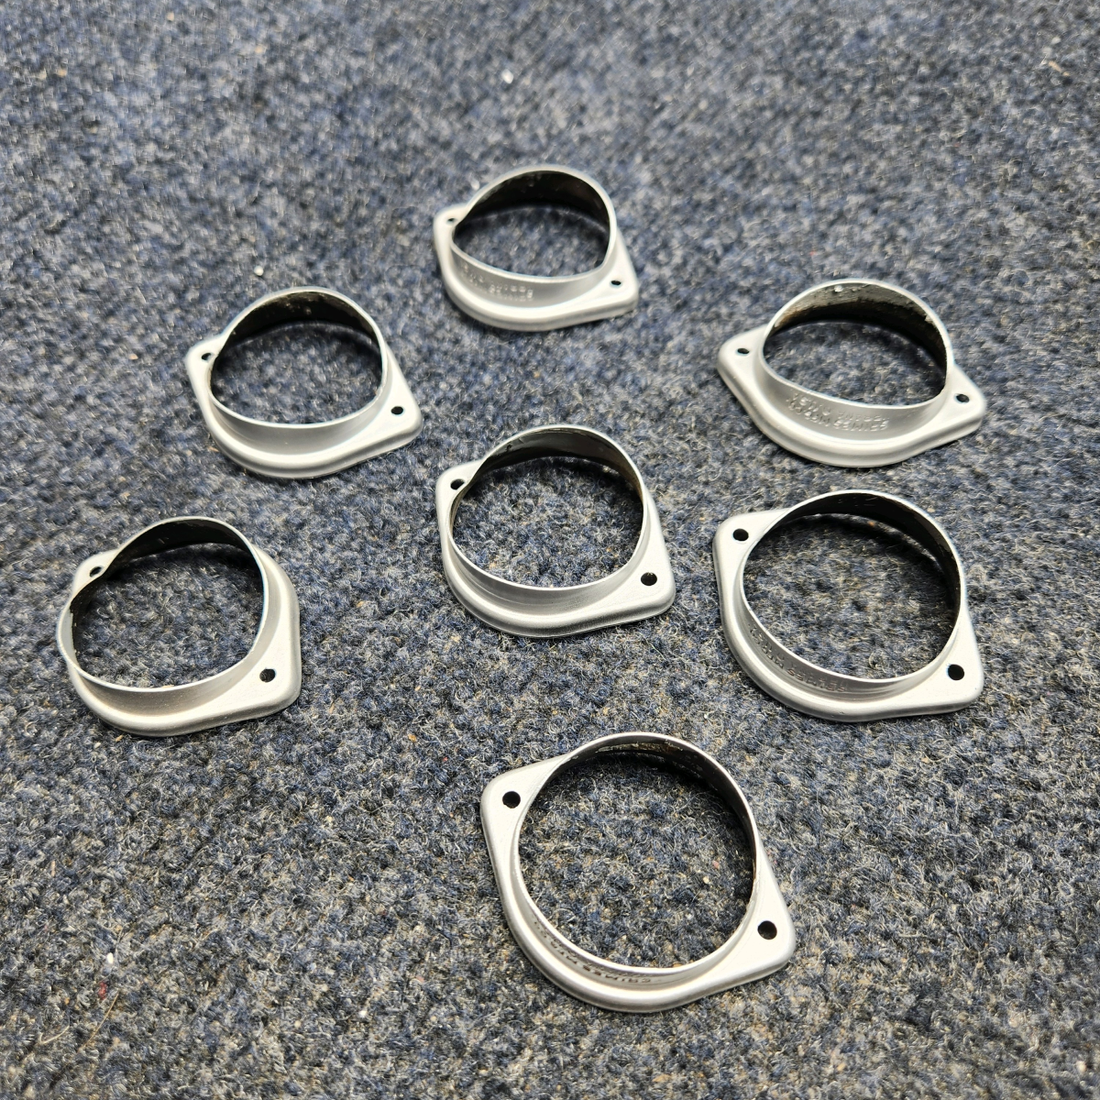 Used aircraft parts for sale, A425A Texas Several WHELEN TAIL STROBE LENS RETAINER PRICE PER EACH